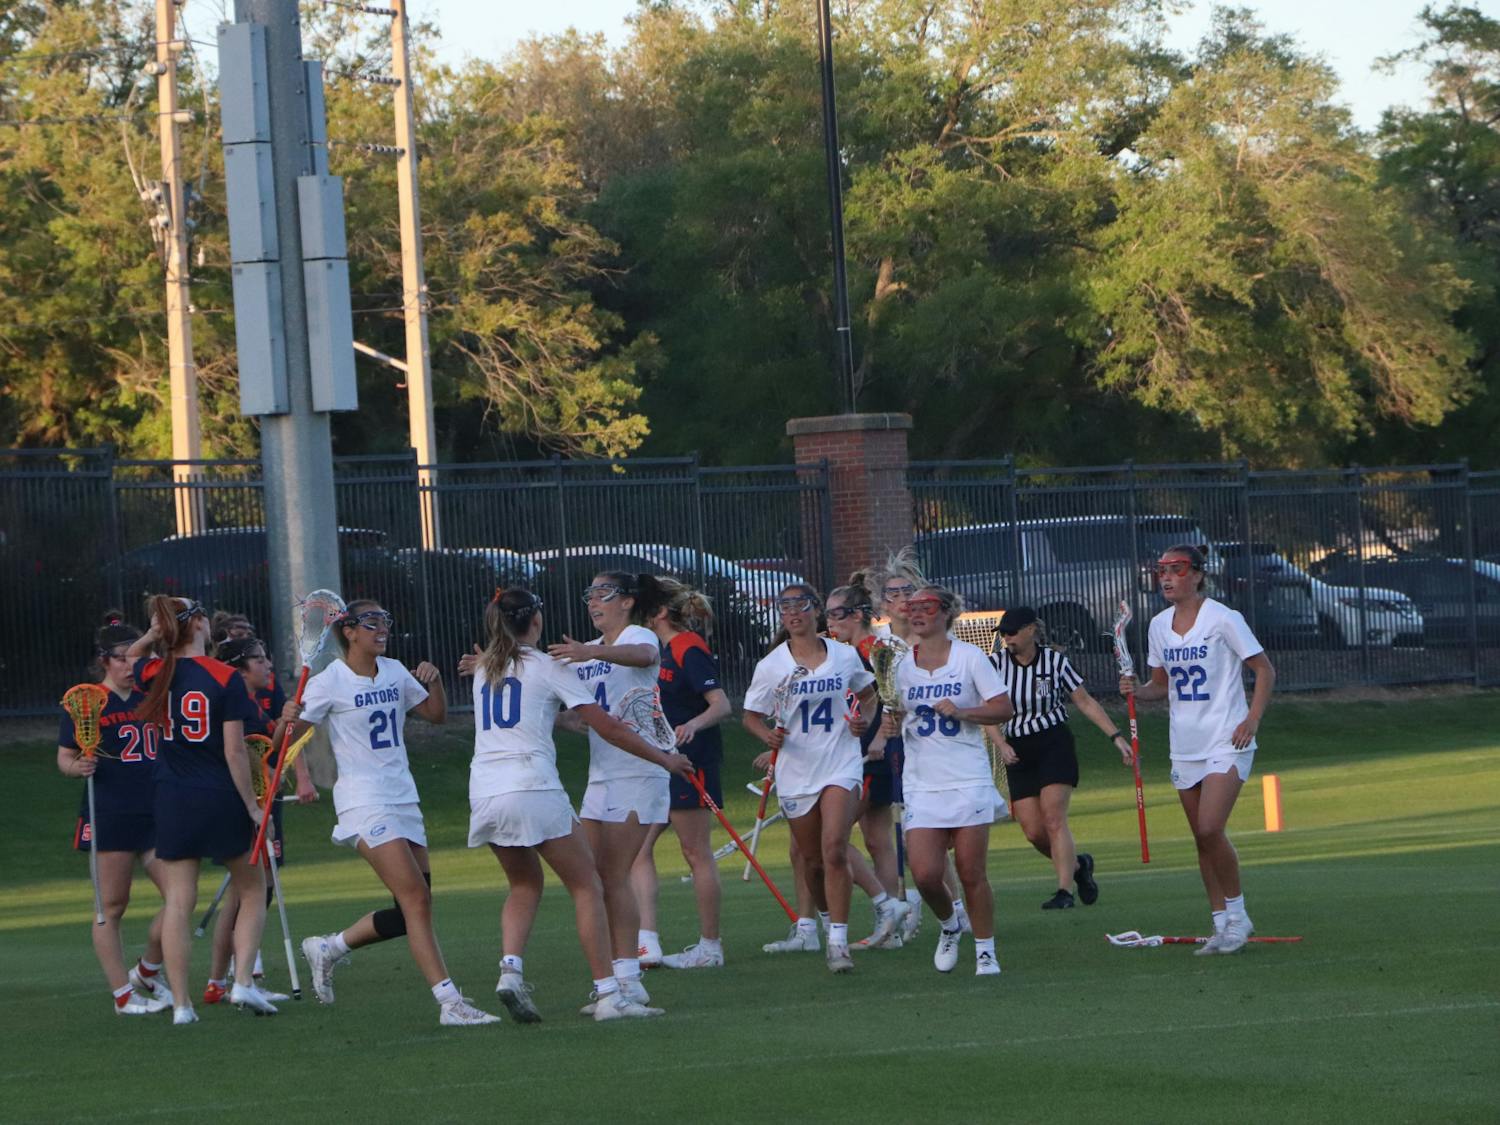 Florida secured the regular season AAC Championship Saturday in a 16-4 win over the East Carolina Pirates.